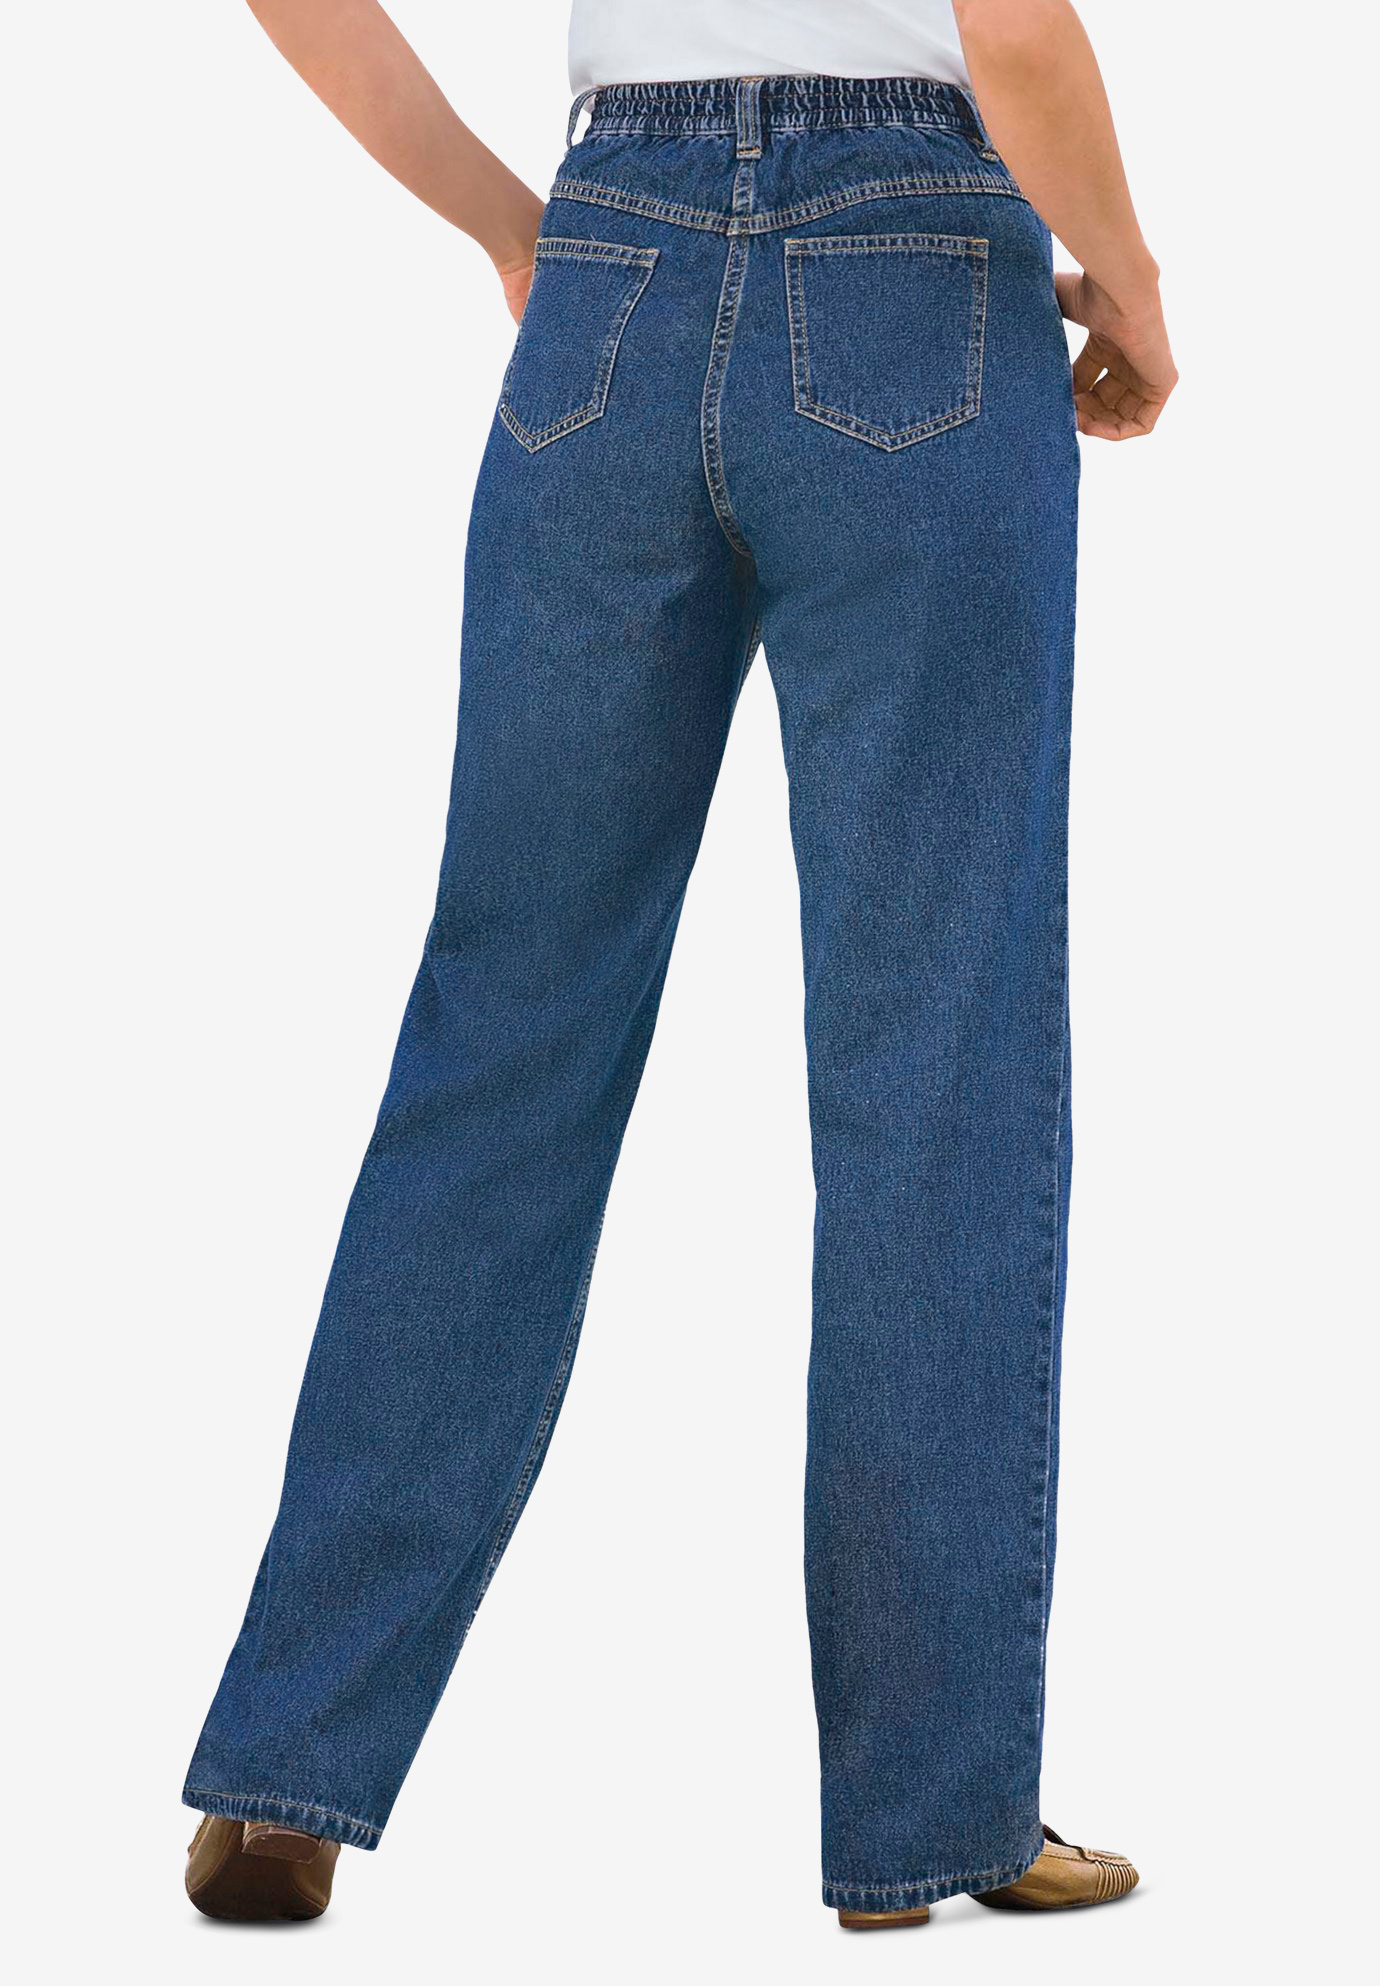 fitted straight leg jeans